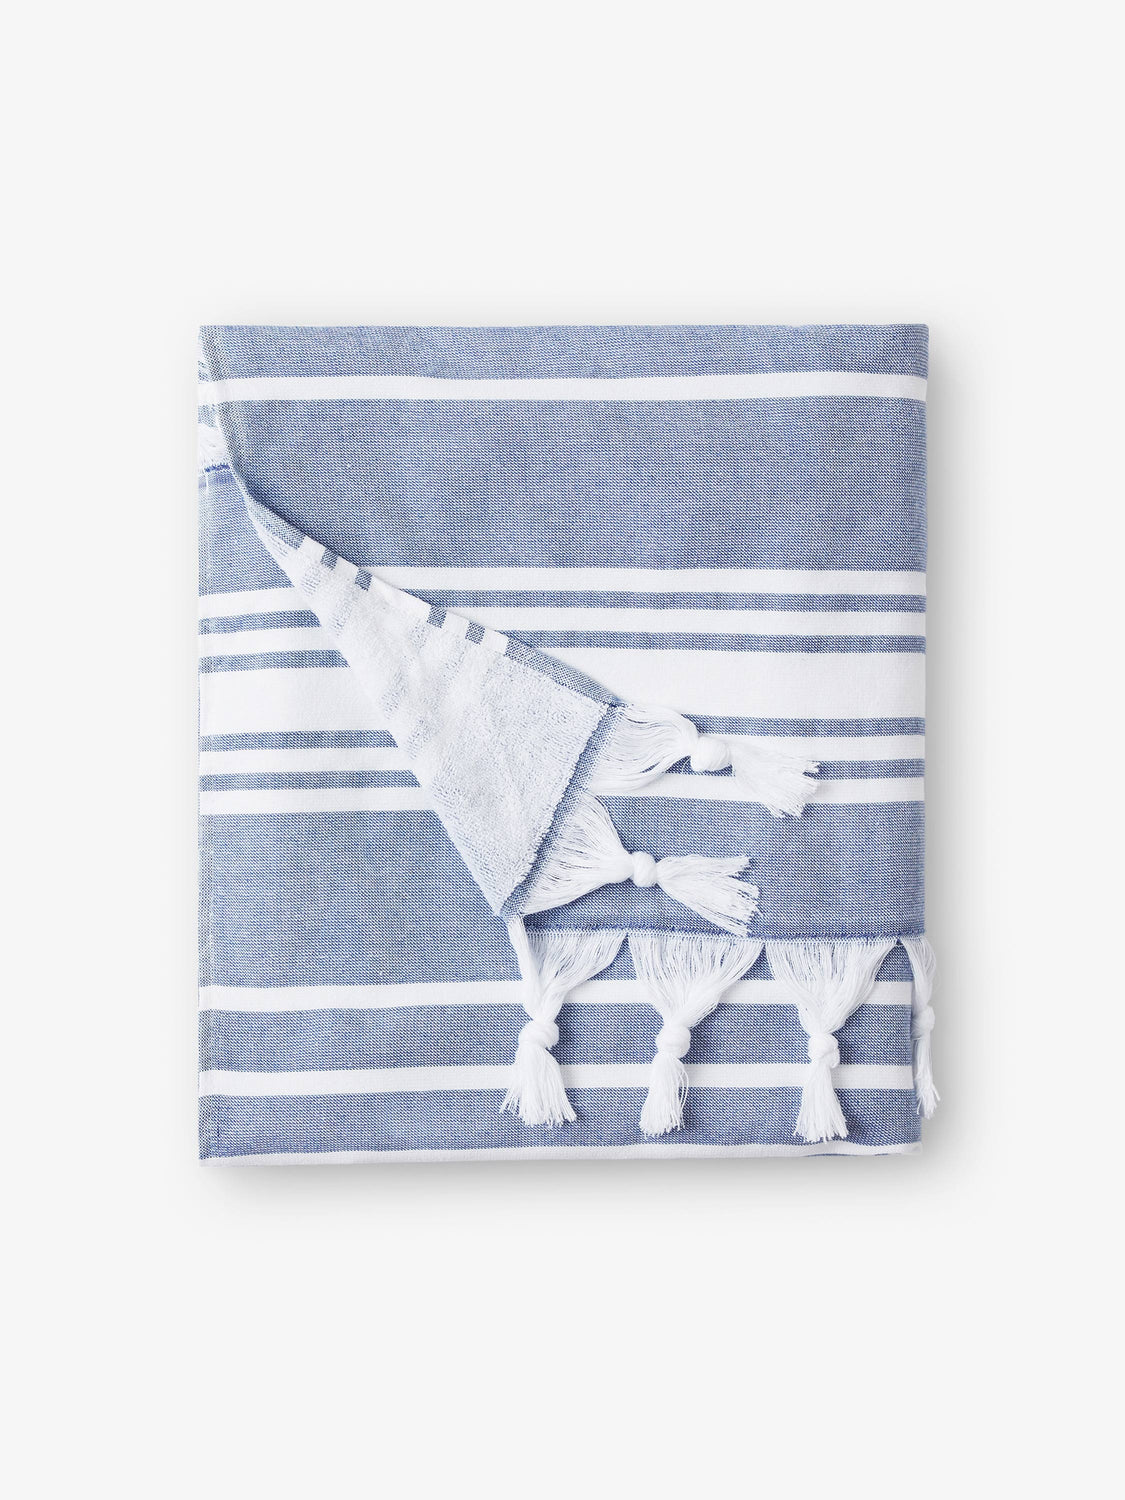 A folded blue and white striped Turkish towel with white fringe.